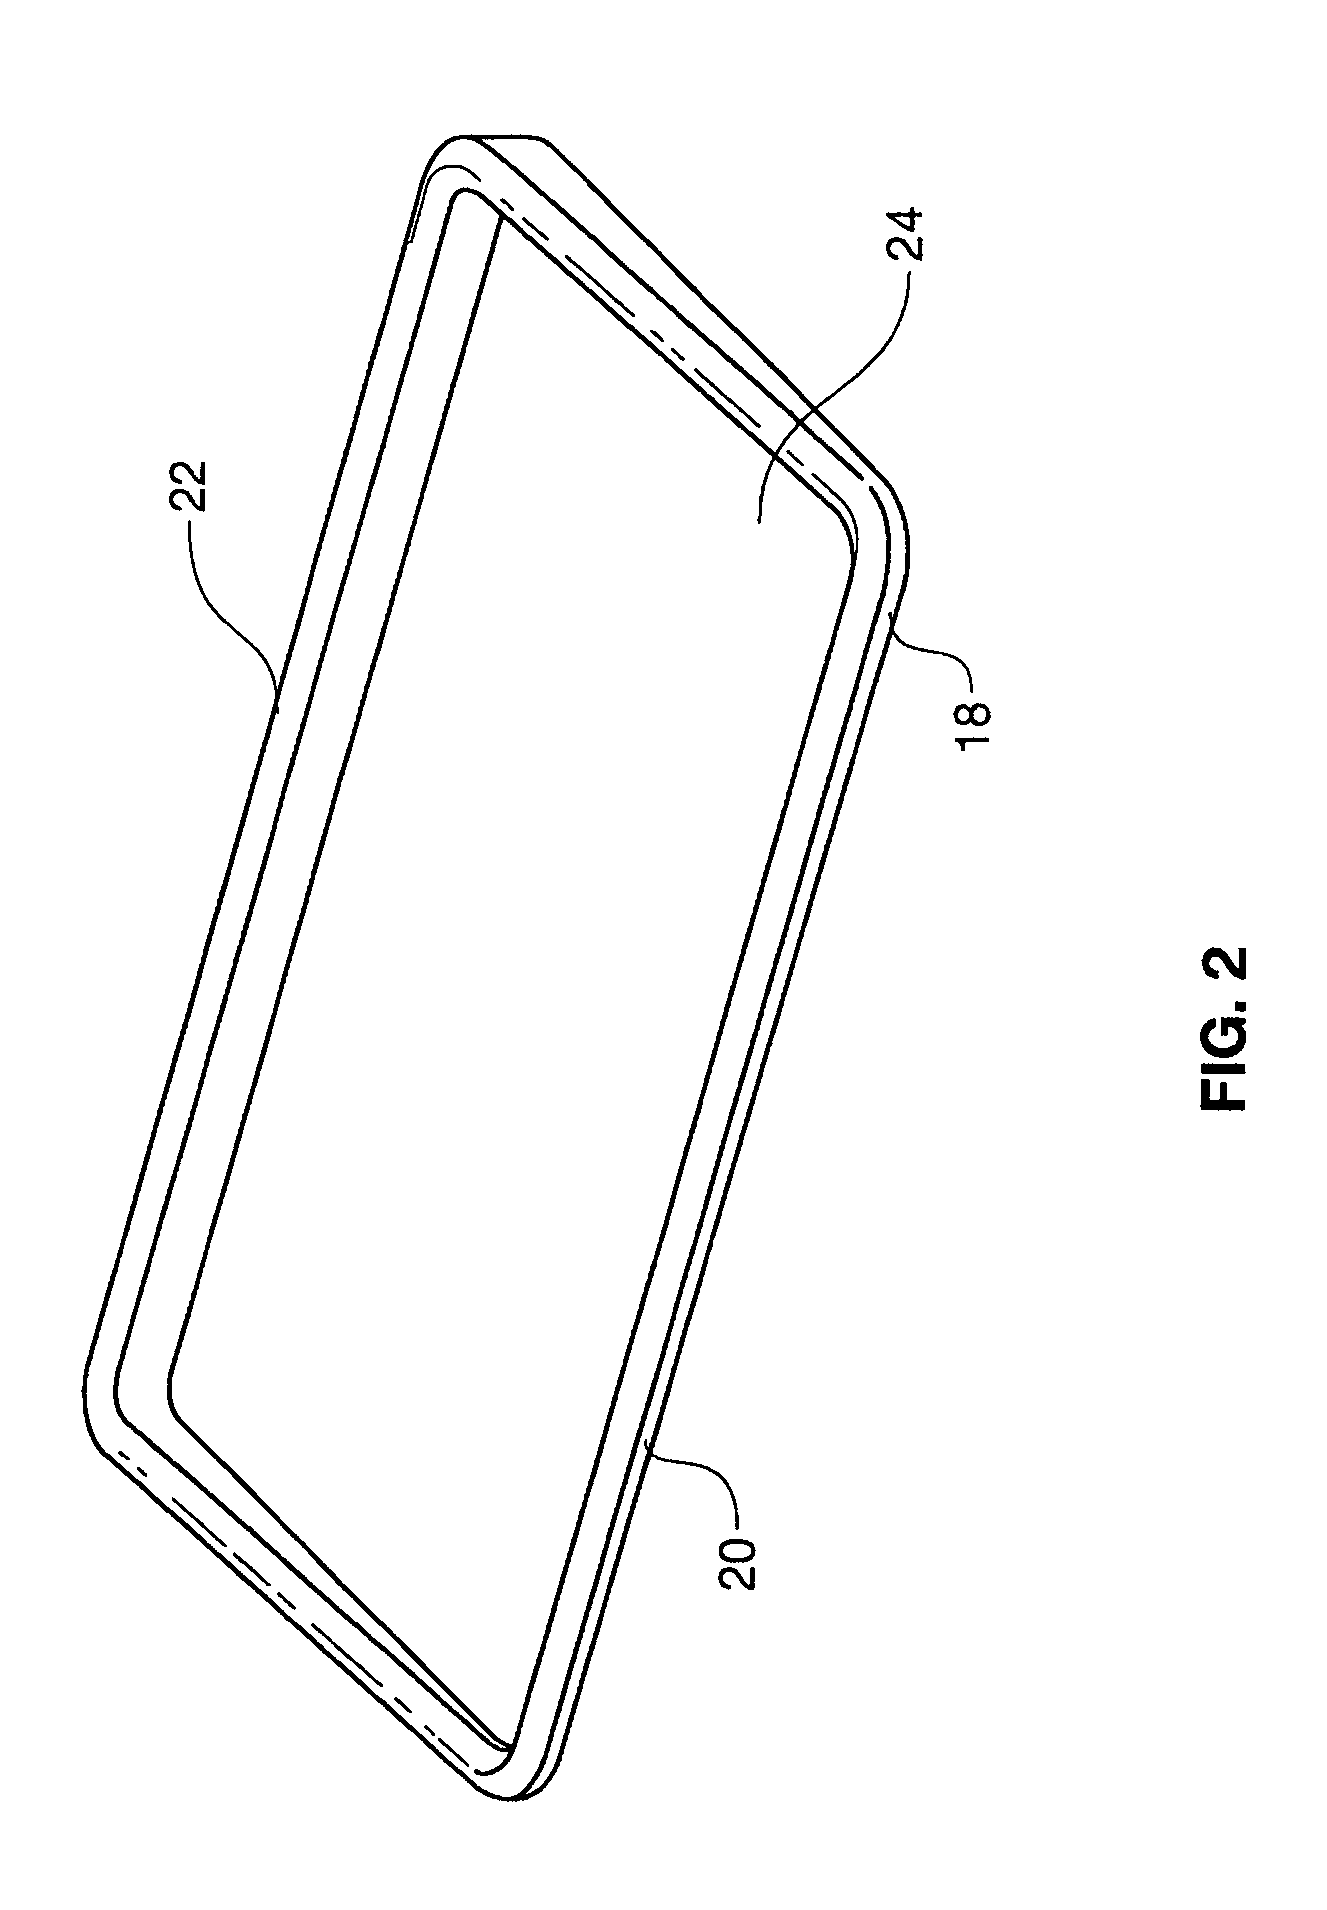 Keyboard supporting tray and arm rests for conventional open arm office chairs